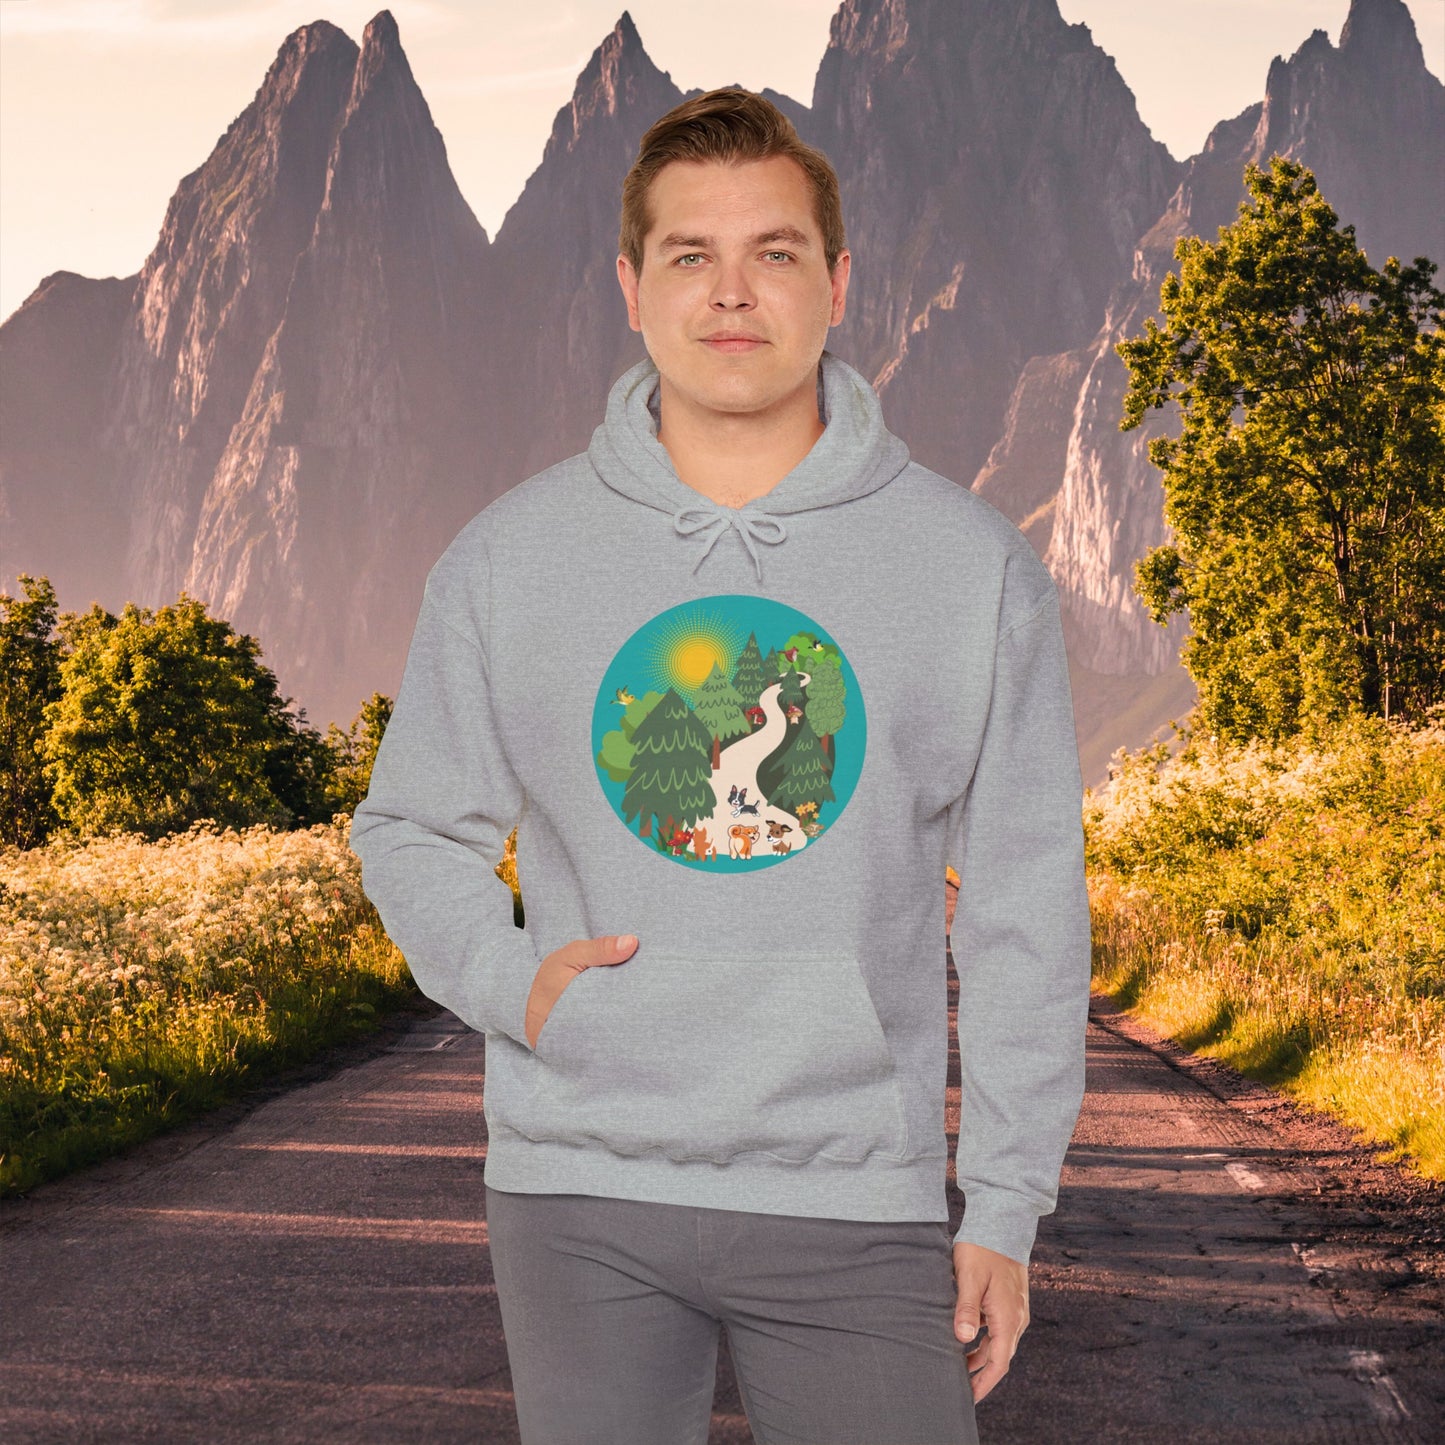 A nature walk with the doggies is so much fun! Enjoy this Unisex Heavy Blend™ Hooded Sweatshirt